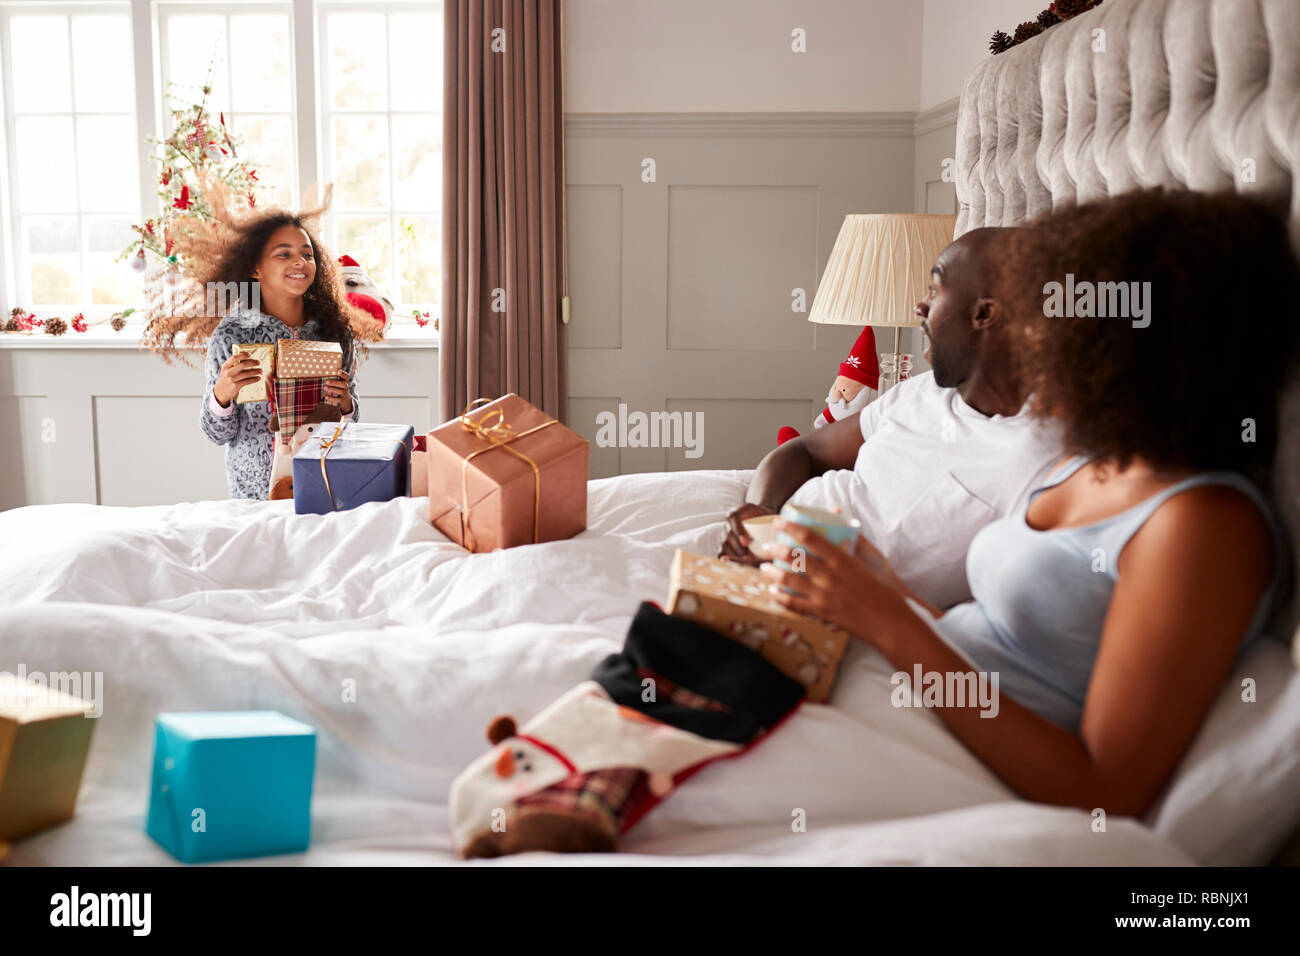 Young girl in her parents’ bedroom carrying presents on Christmas morning, parents sitting up in bed, side view Stock Photo